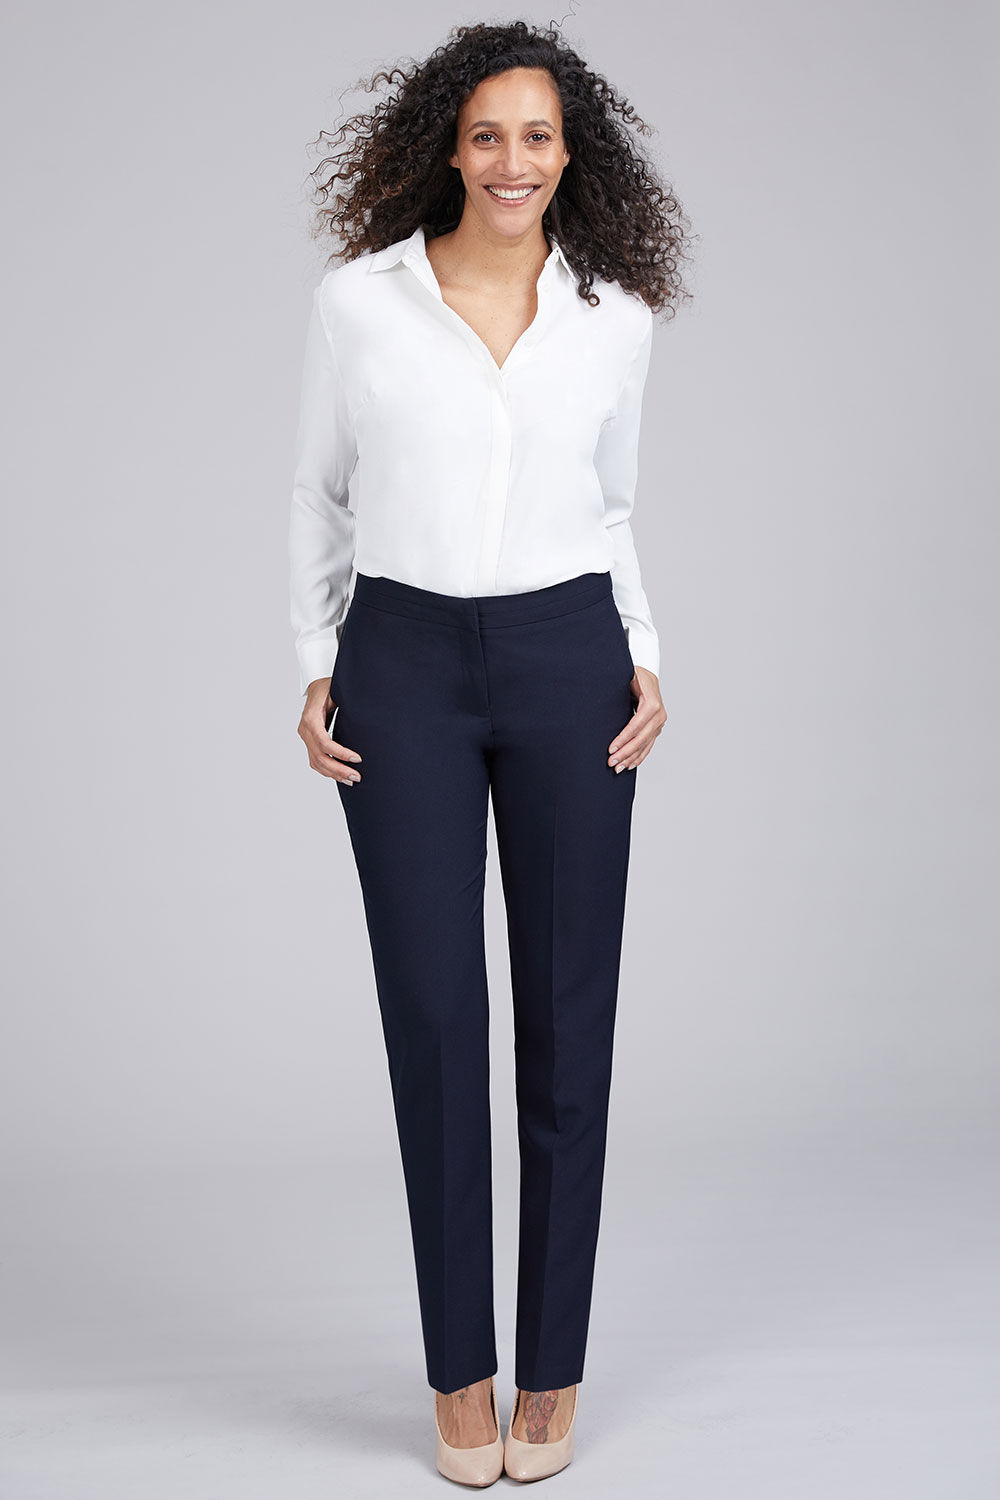 Buy Popwings Women Casual Rust Self Designed Solid Formal Trousers | Latest  Design Trousers | Stylish Trousers | Regular Wear Trousers Online at Best  Prices in India - JioMart.